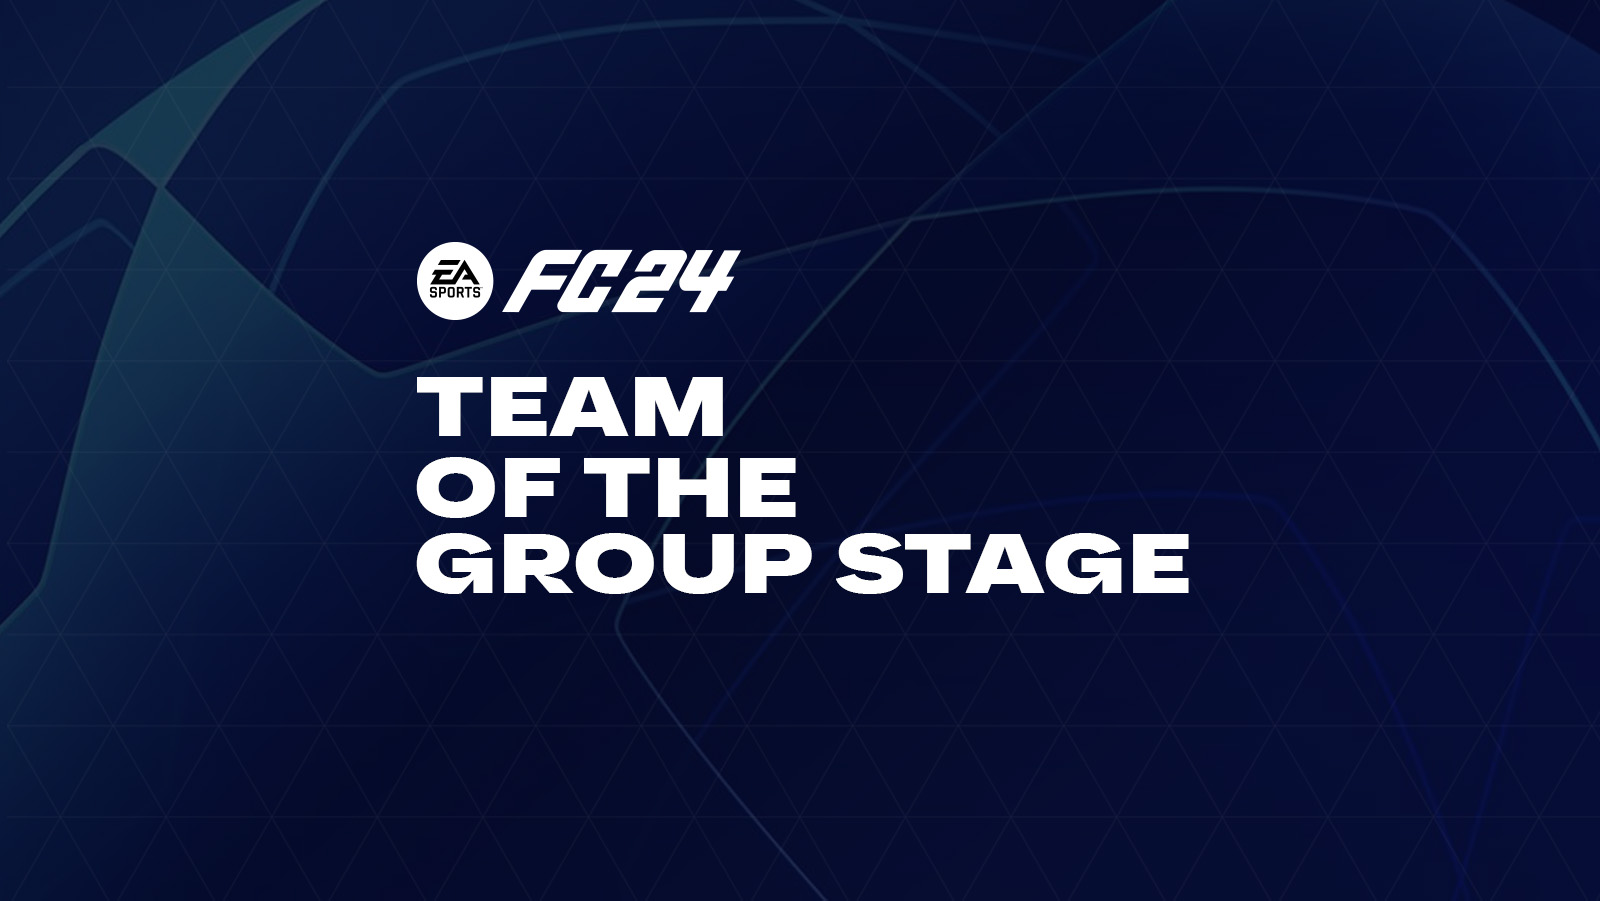 How to Play the UEFA Champions League in FIFA 19 – FIFPlay